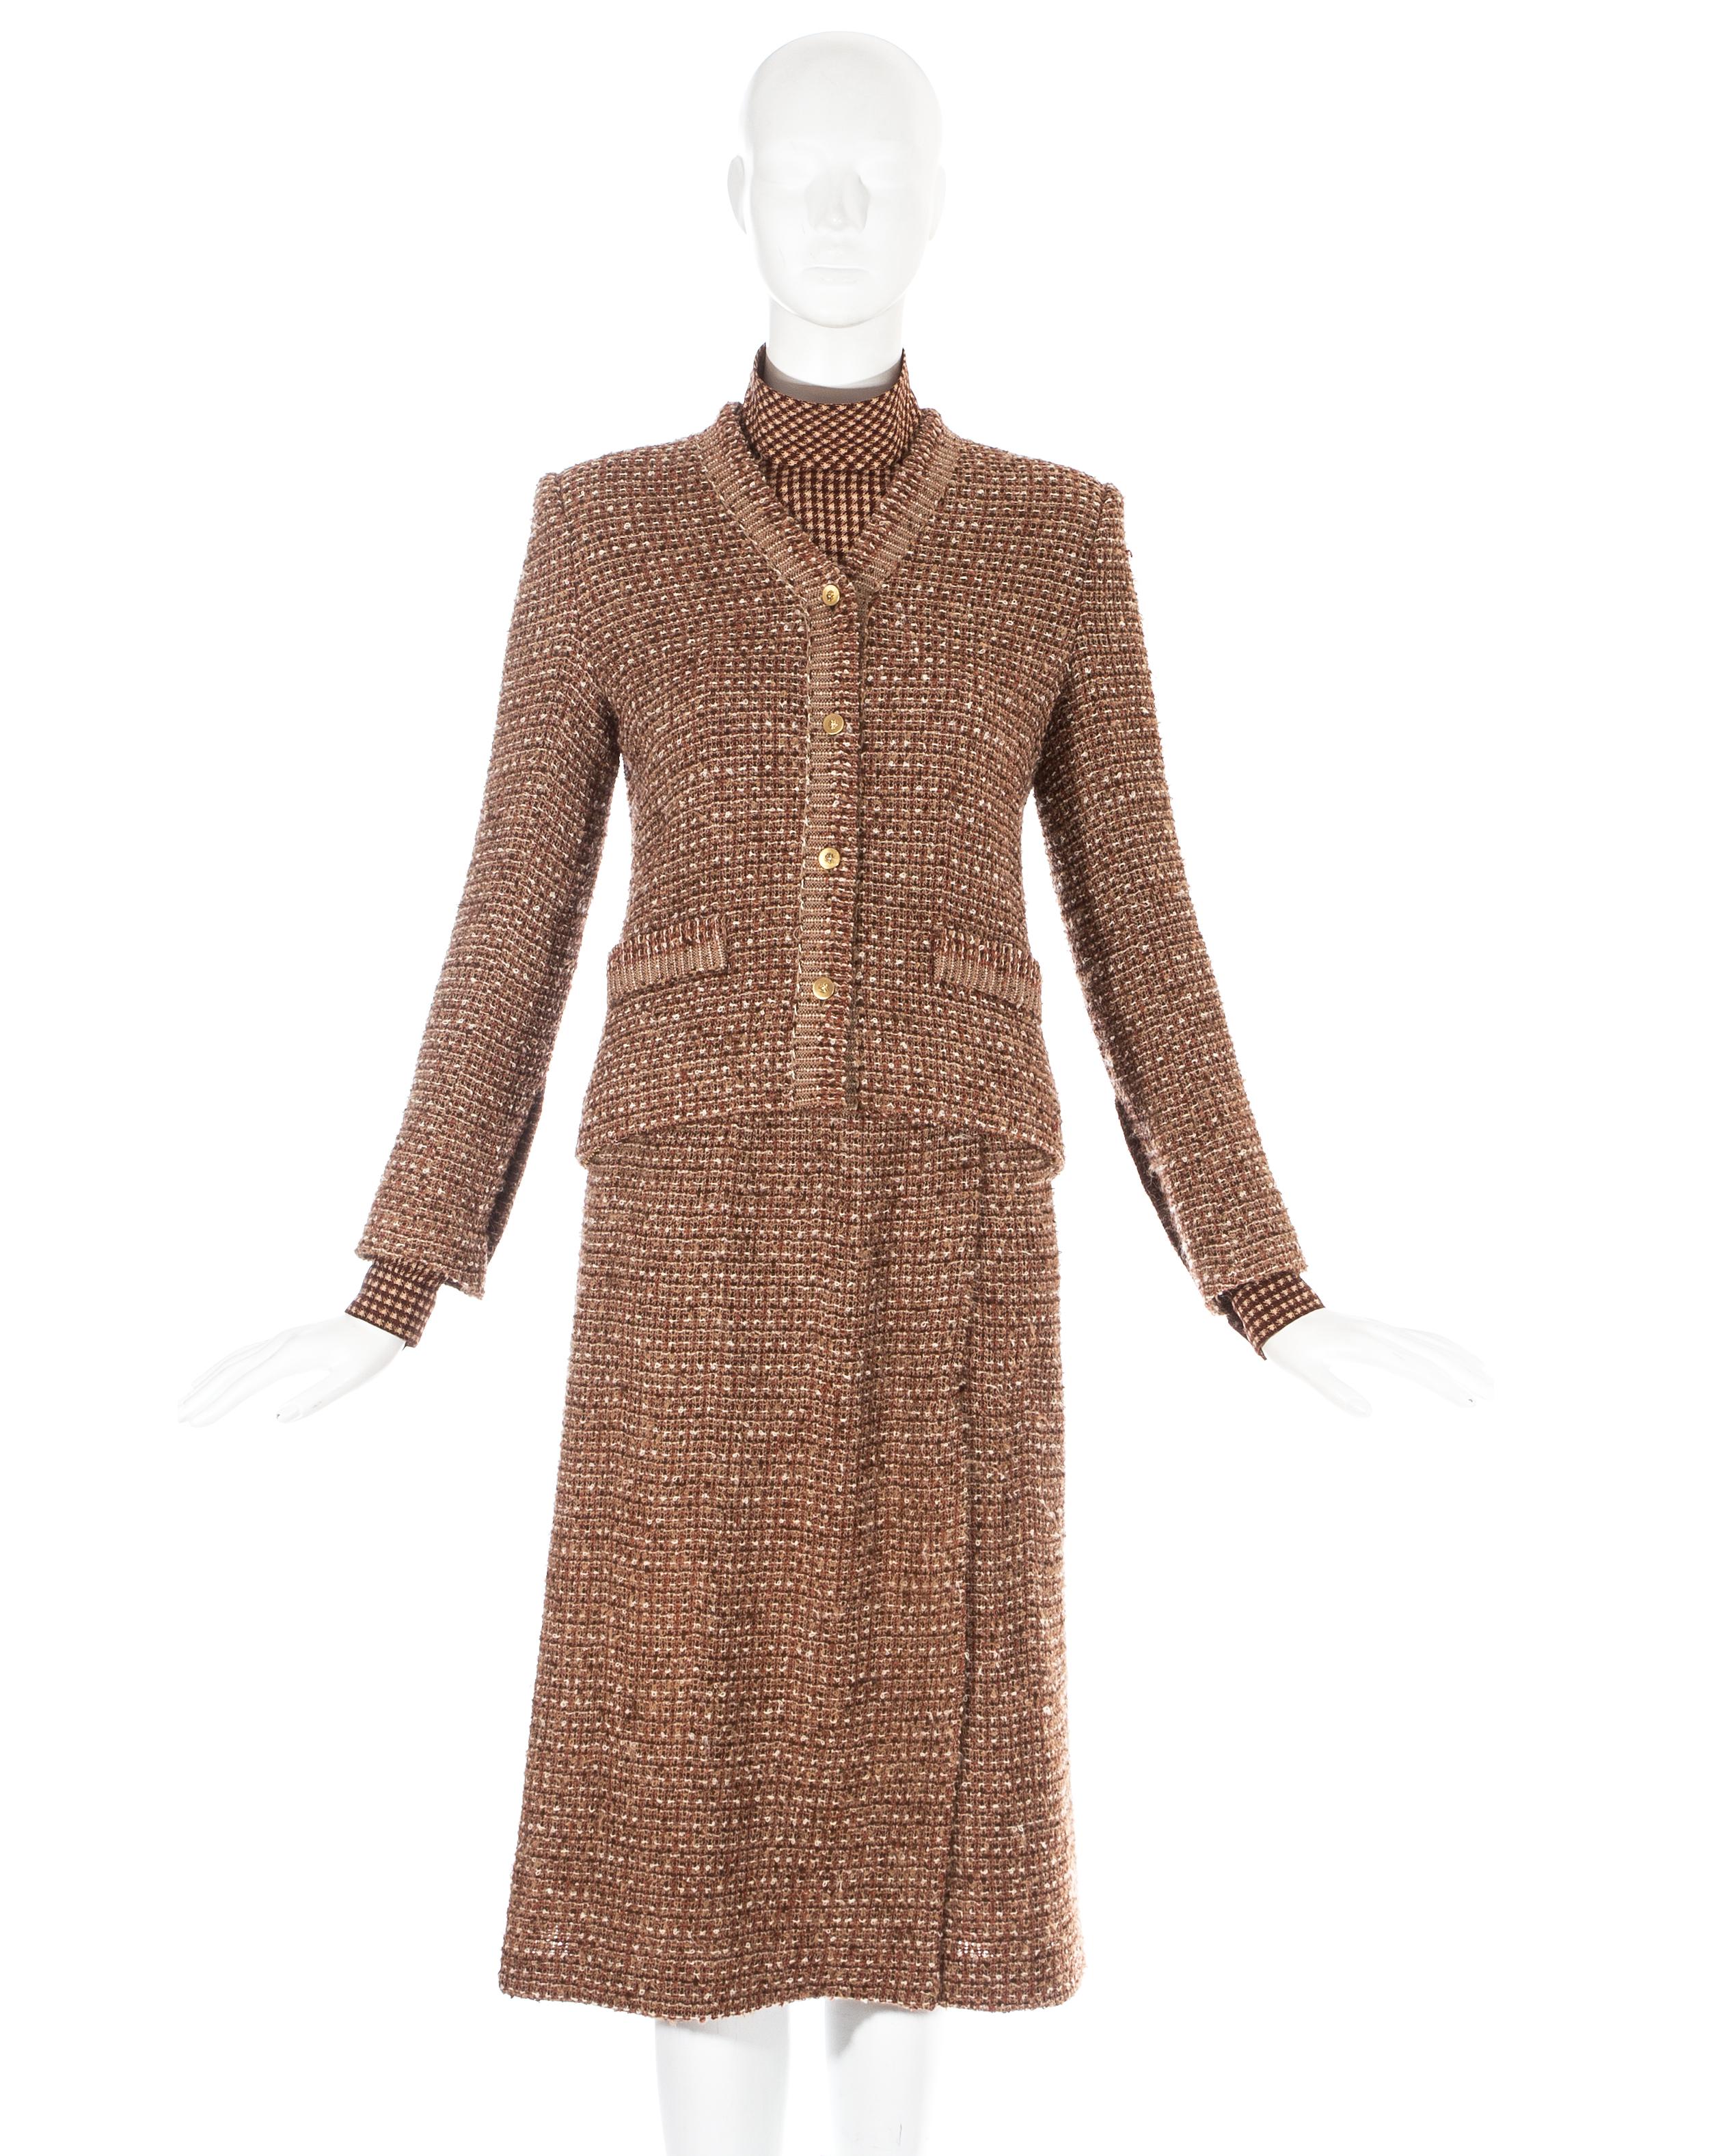 Chanel  brown wool tweed 3 piece skirt suit. Jacket with gold lion buttons, silk lining with interior gold chain hem. Matching below the knee skirt.